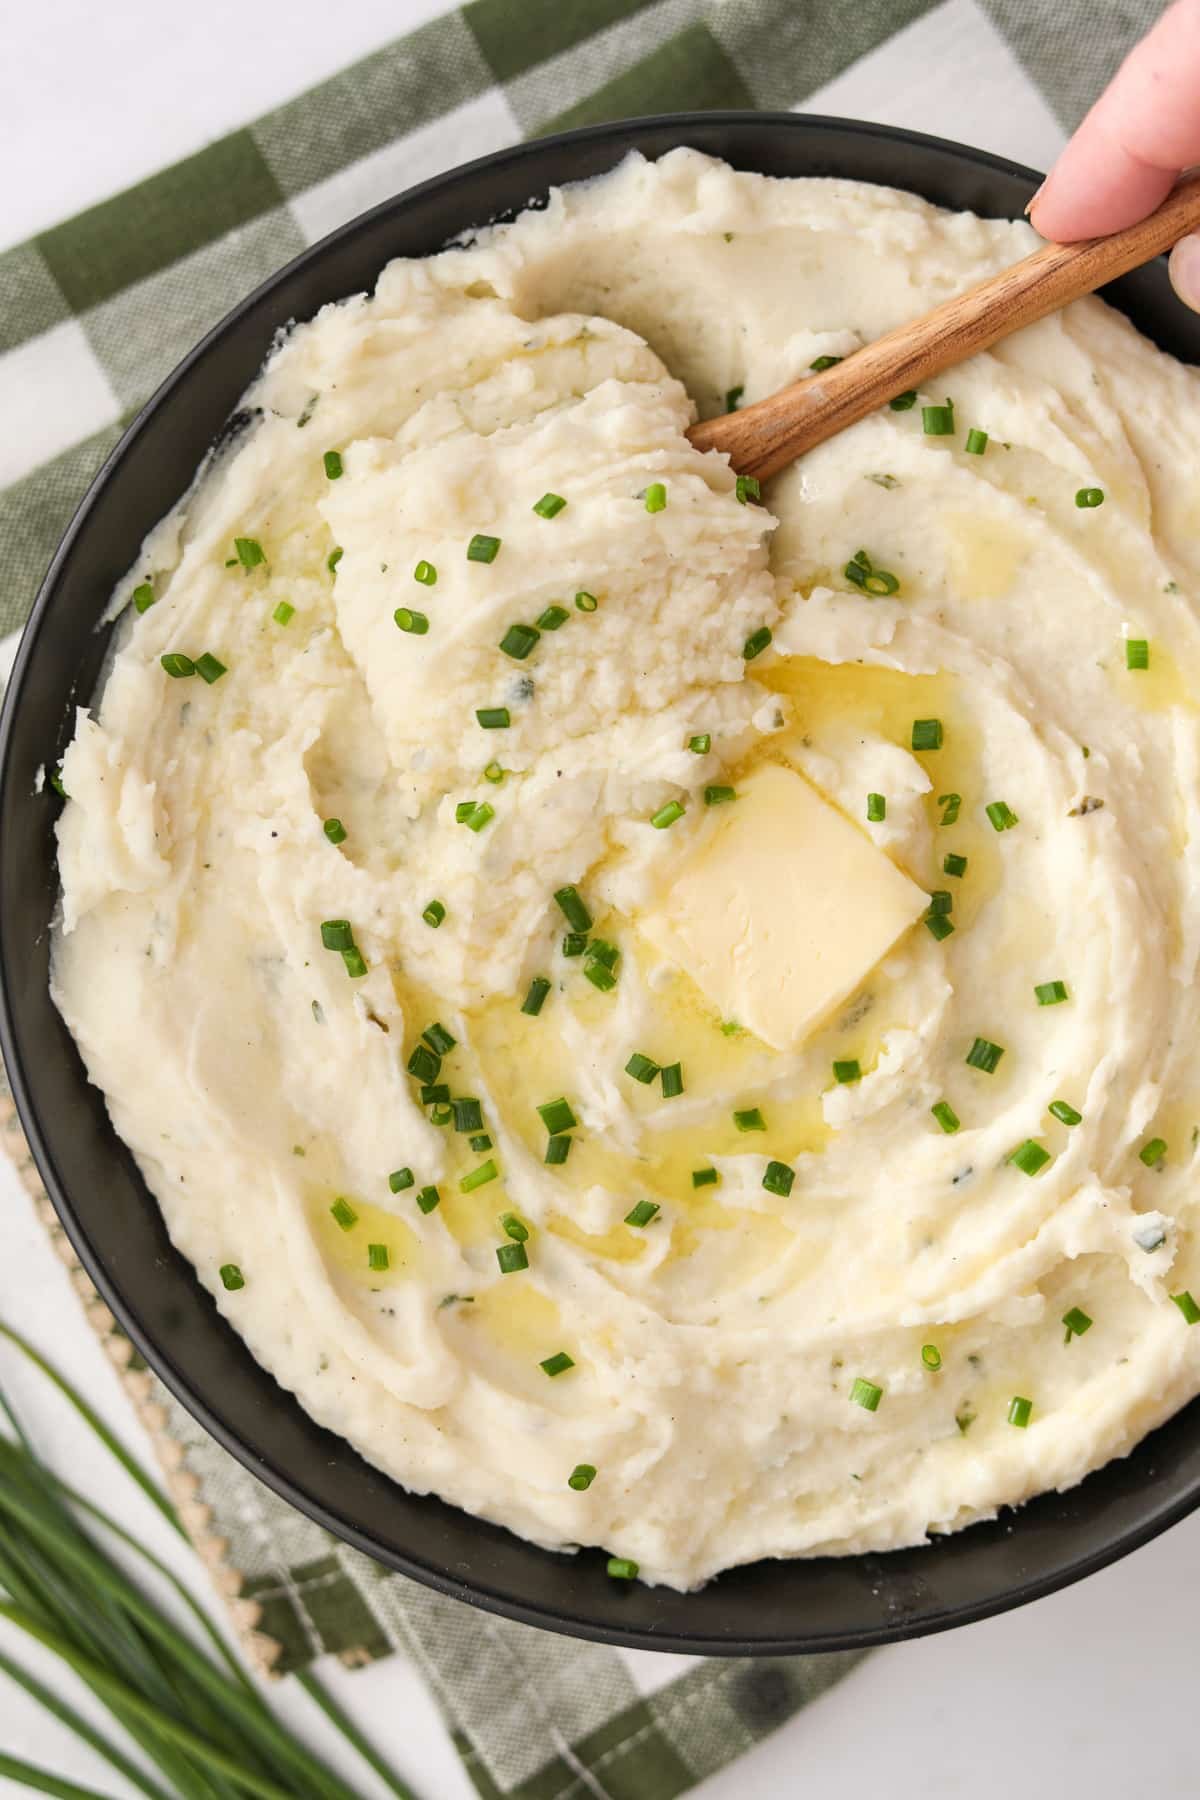 A bowl of mashed potatoes topped with chopped chives.